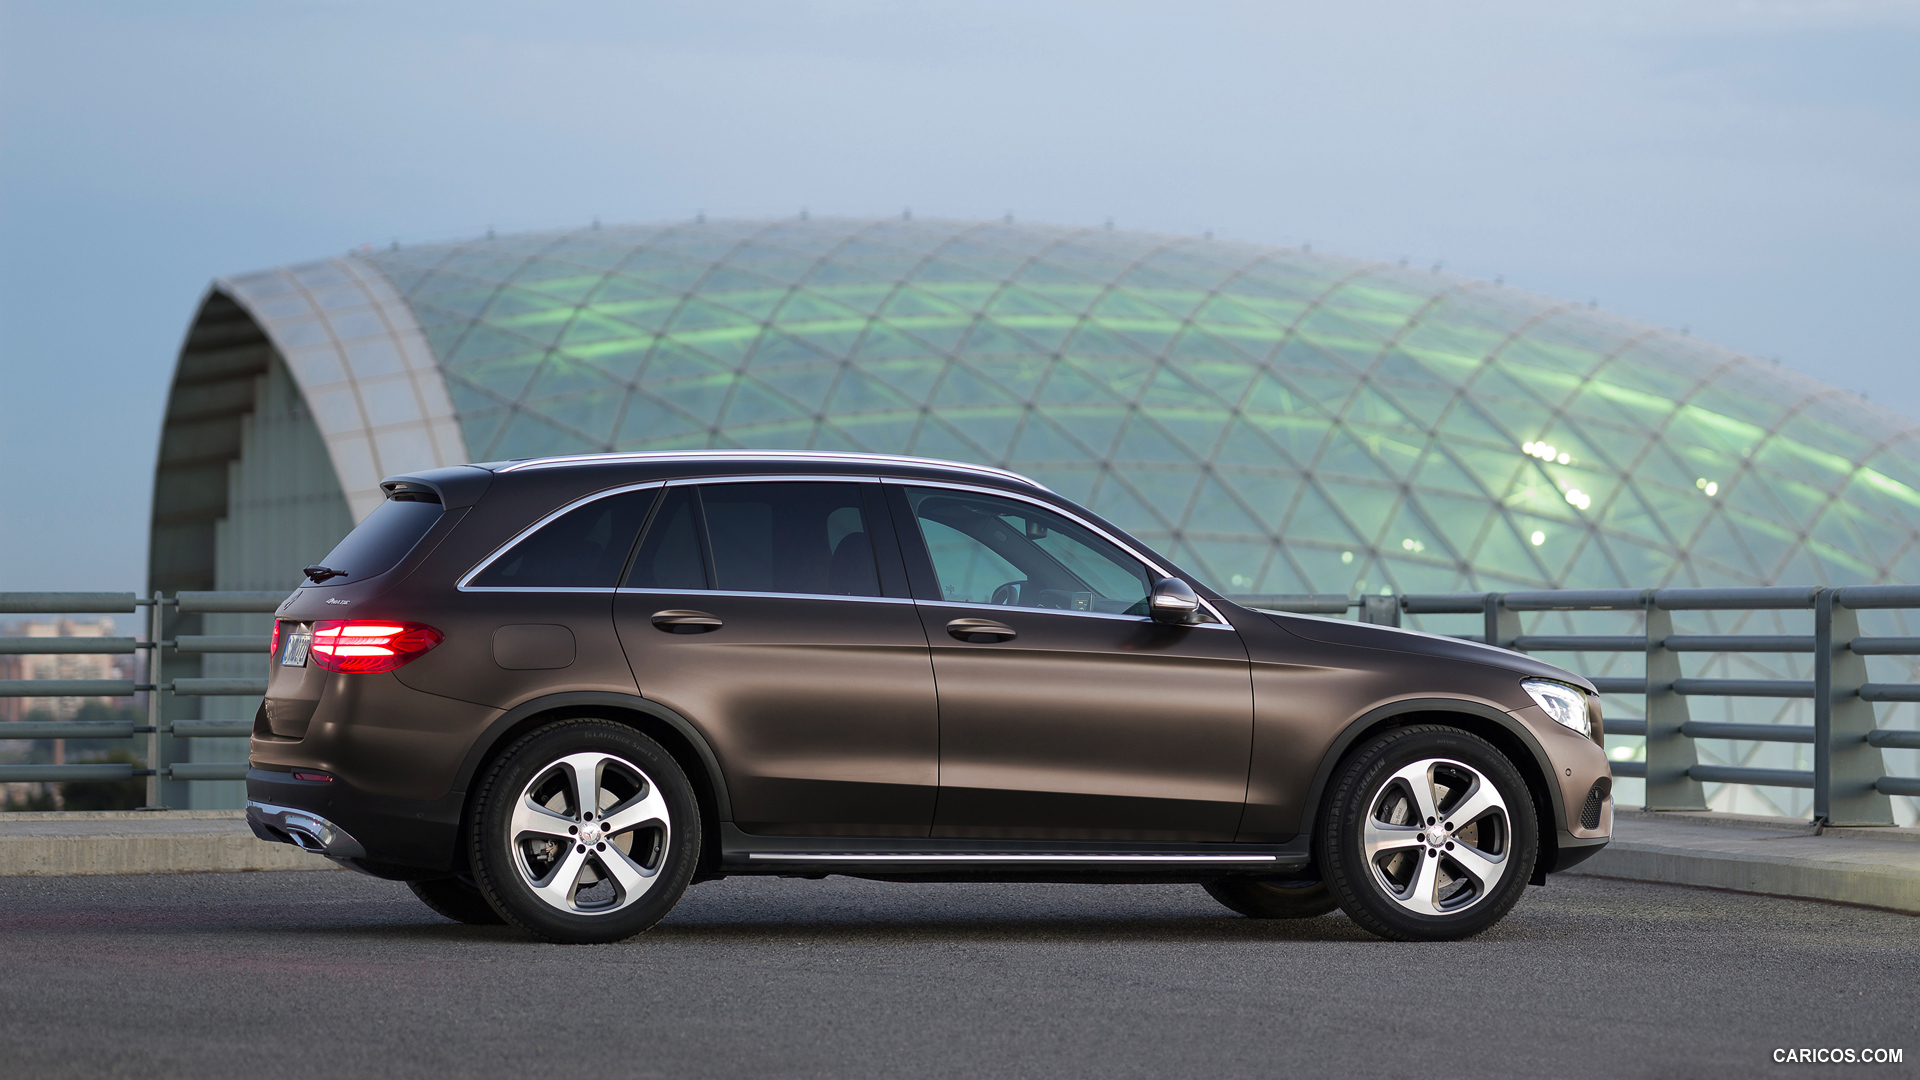 2016 Mercedes-Benz GLC-Class GLC 250d 4MATIC (CITRINE BROWN MAGNO, Offroad Line) - Side, #51 of 254